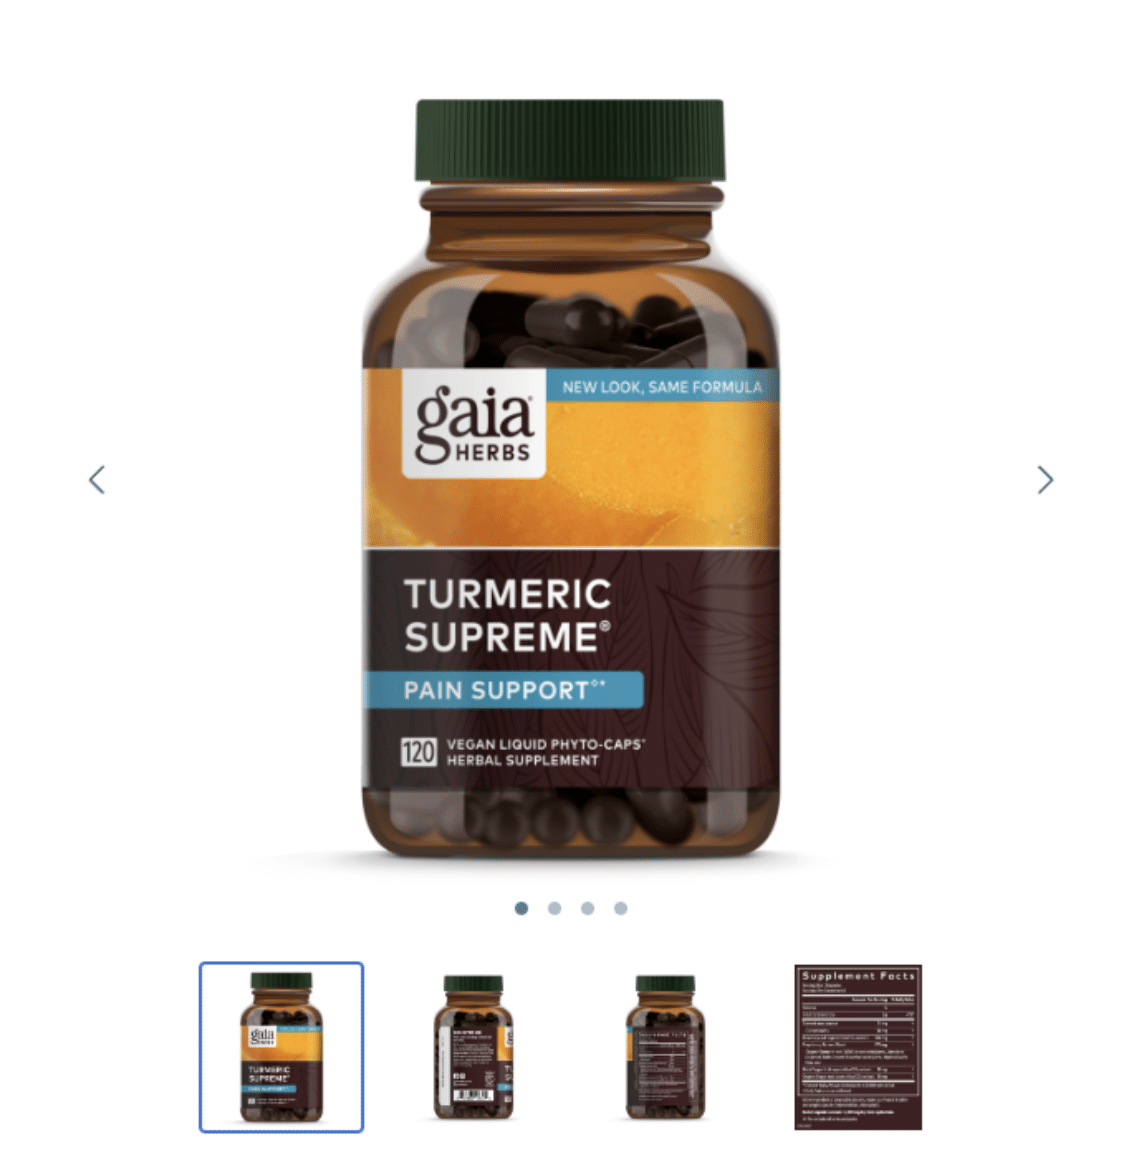 Image view of Medly product, Gaia Herbs Turmeric Supreme Pain Support in a brown bottle with images below of bottle and supplement info.